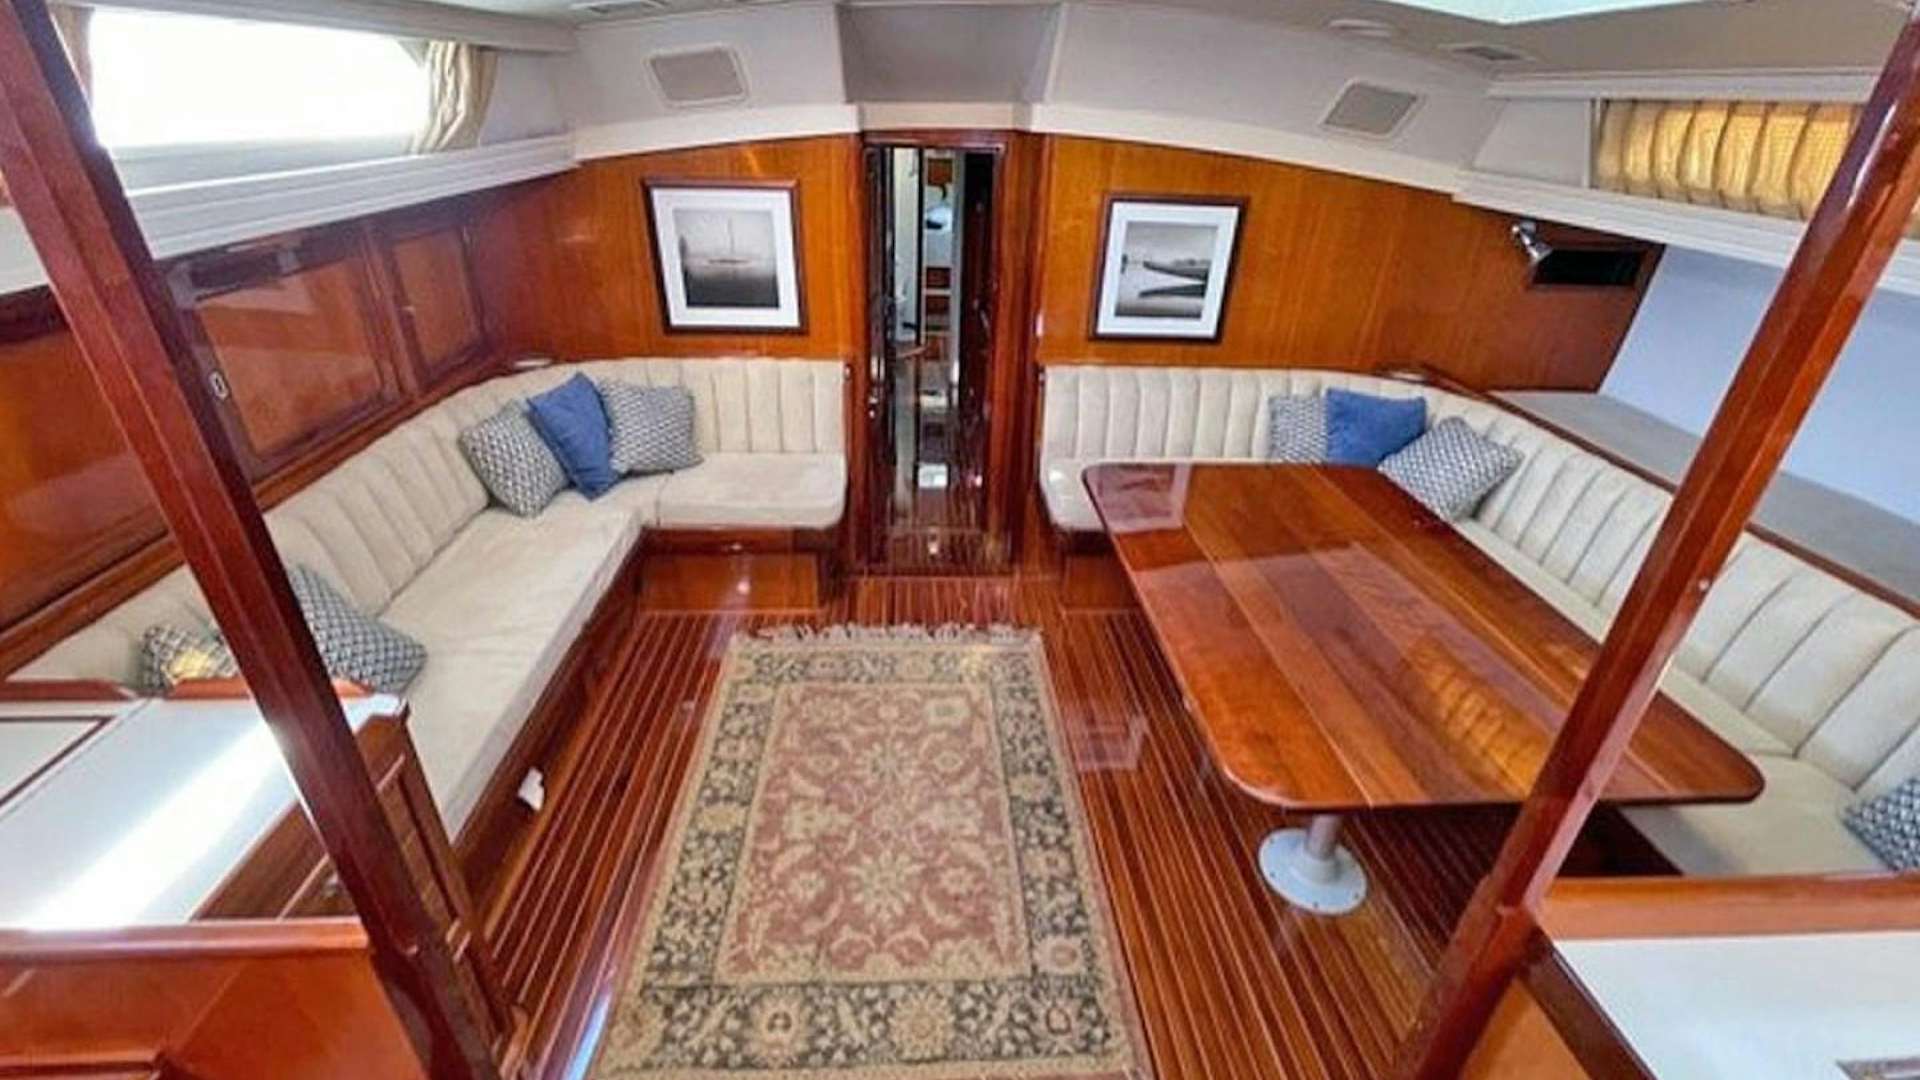 Sirocco
Yacht for Sale